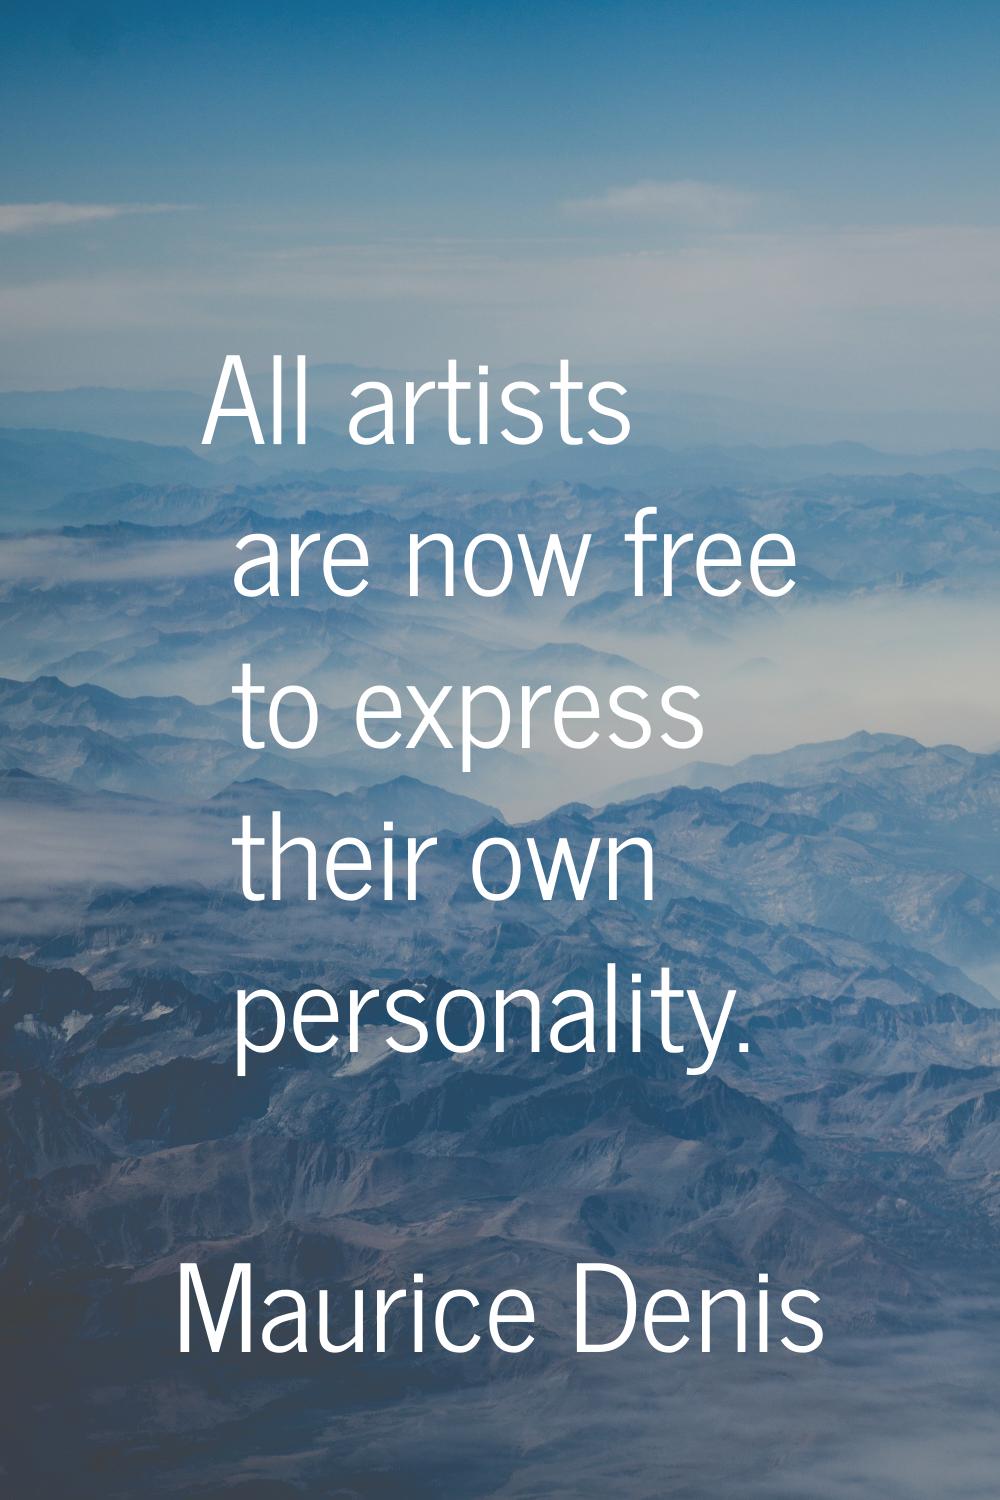 All artists are now free to express their own personality.